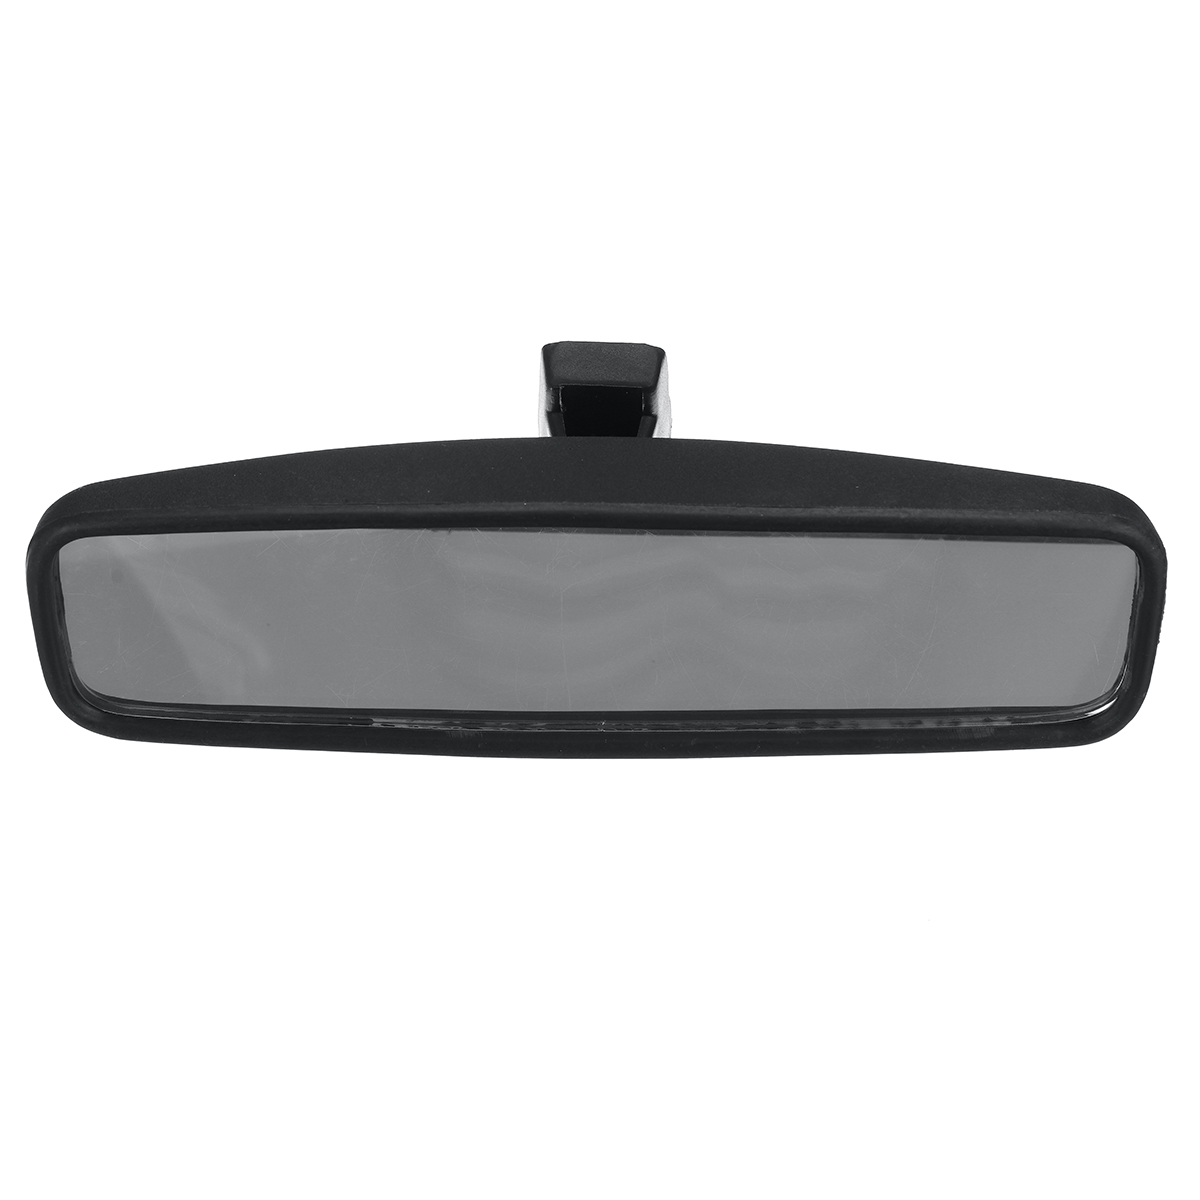 Interior Rear View Mirror Glass Car Wide Flat for Peugeot 106 205 206 306 405